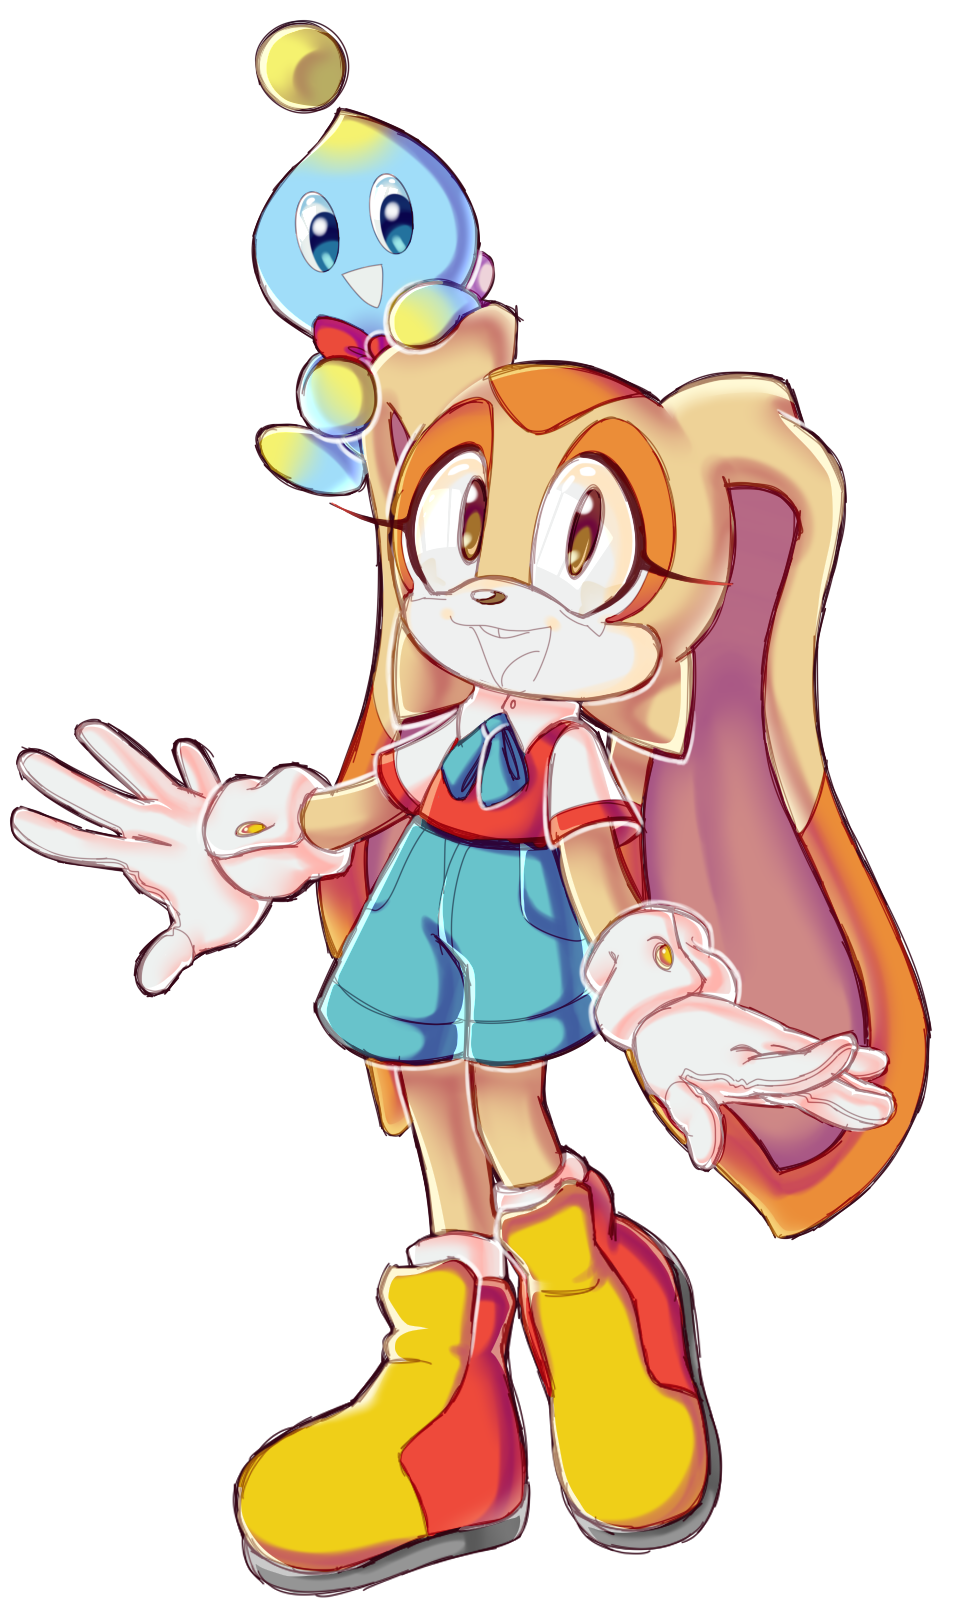 4248 Safe Artistaatroxvaux Cheese Chao Cream The Rabbit Chao Rabbit Gloves Looking